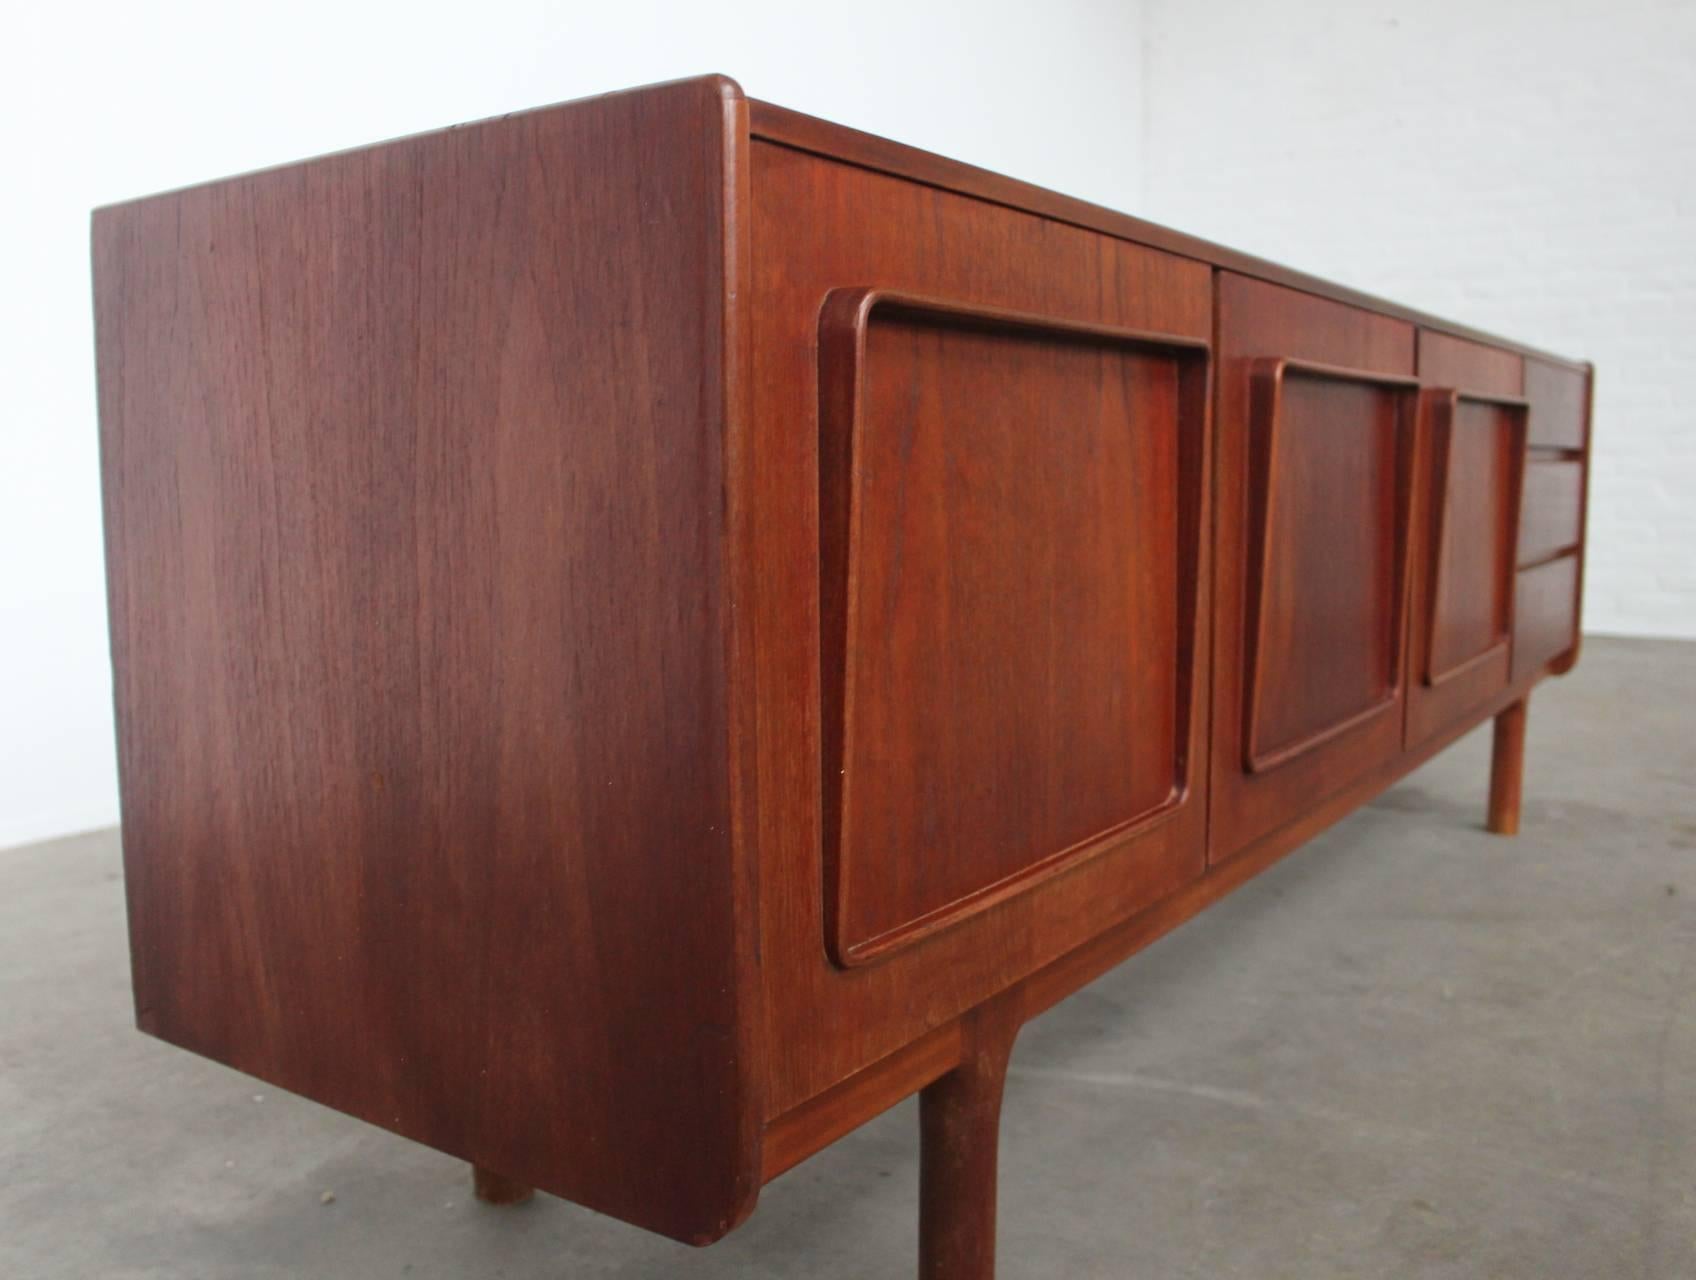 Beautiful organic sideboard by A.H. McIntosh & Co Ltd. 1960s. This piece is about 10 cm. lower than usual sideboards.